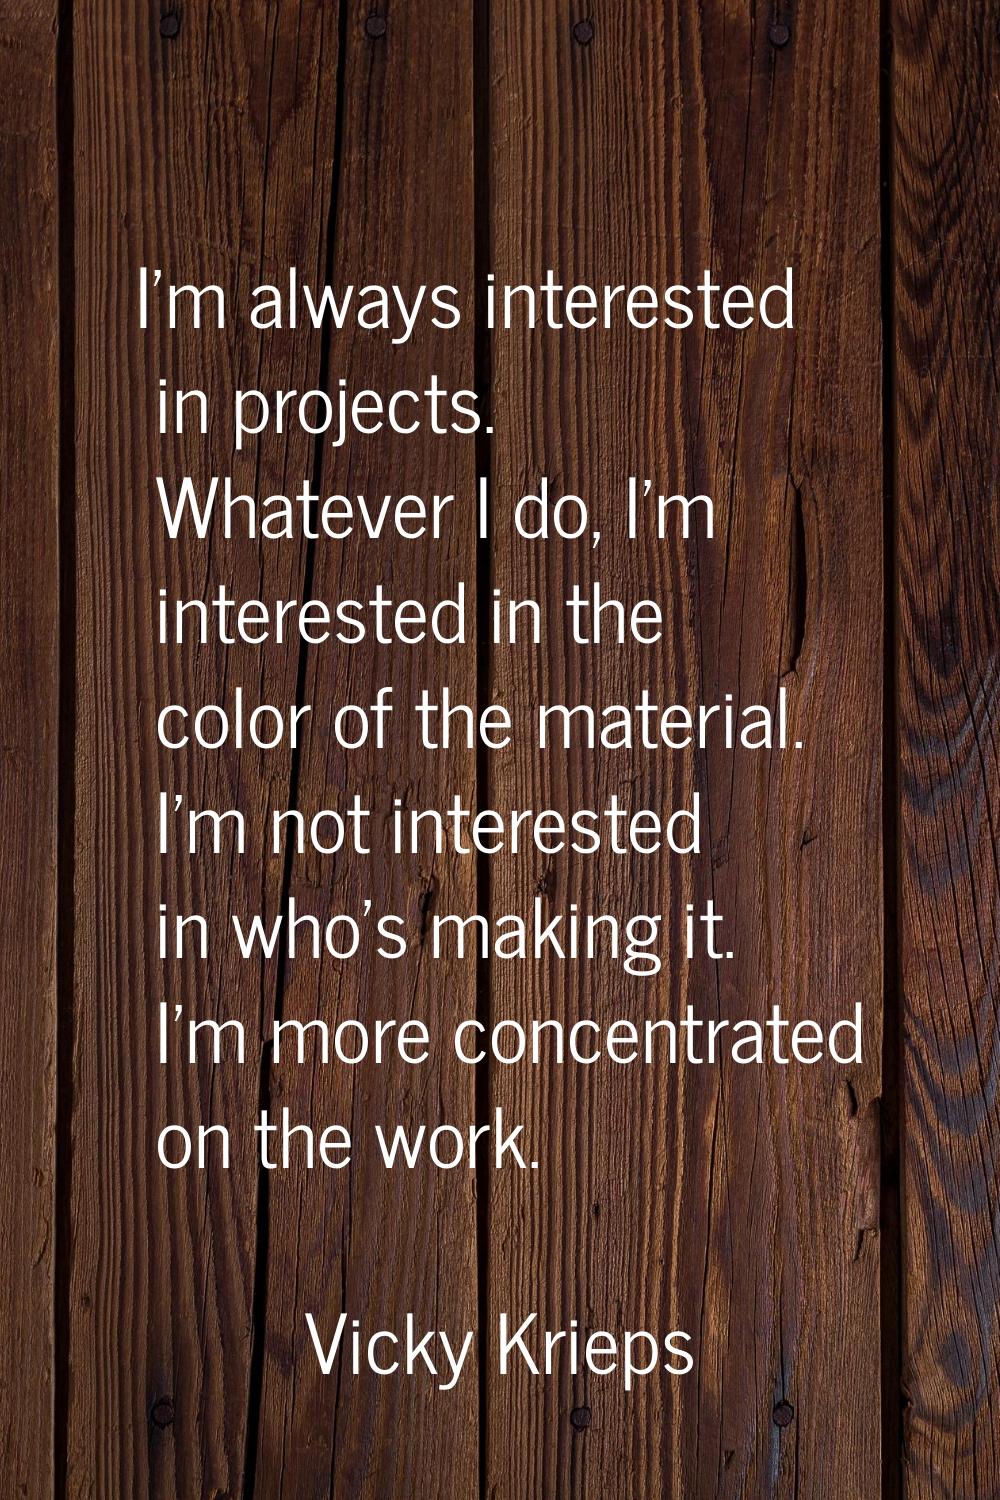 I'm always interested in projects. Whatever I do, I'm interested in the color of the material. I'm 